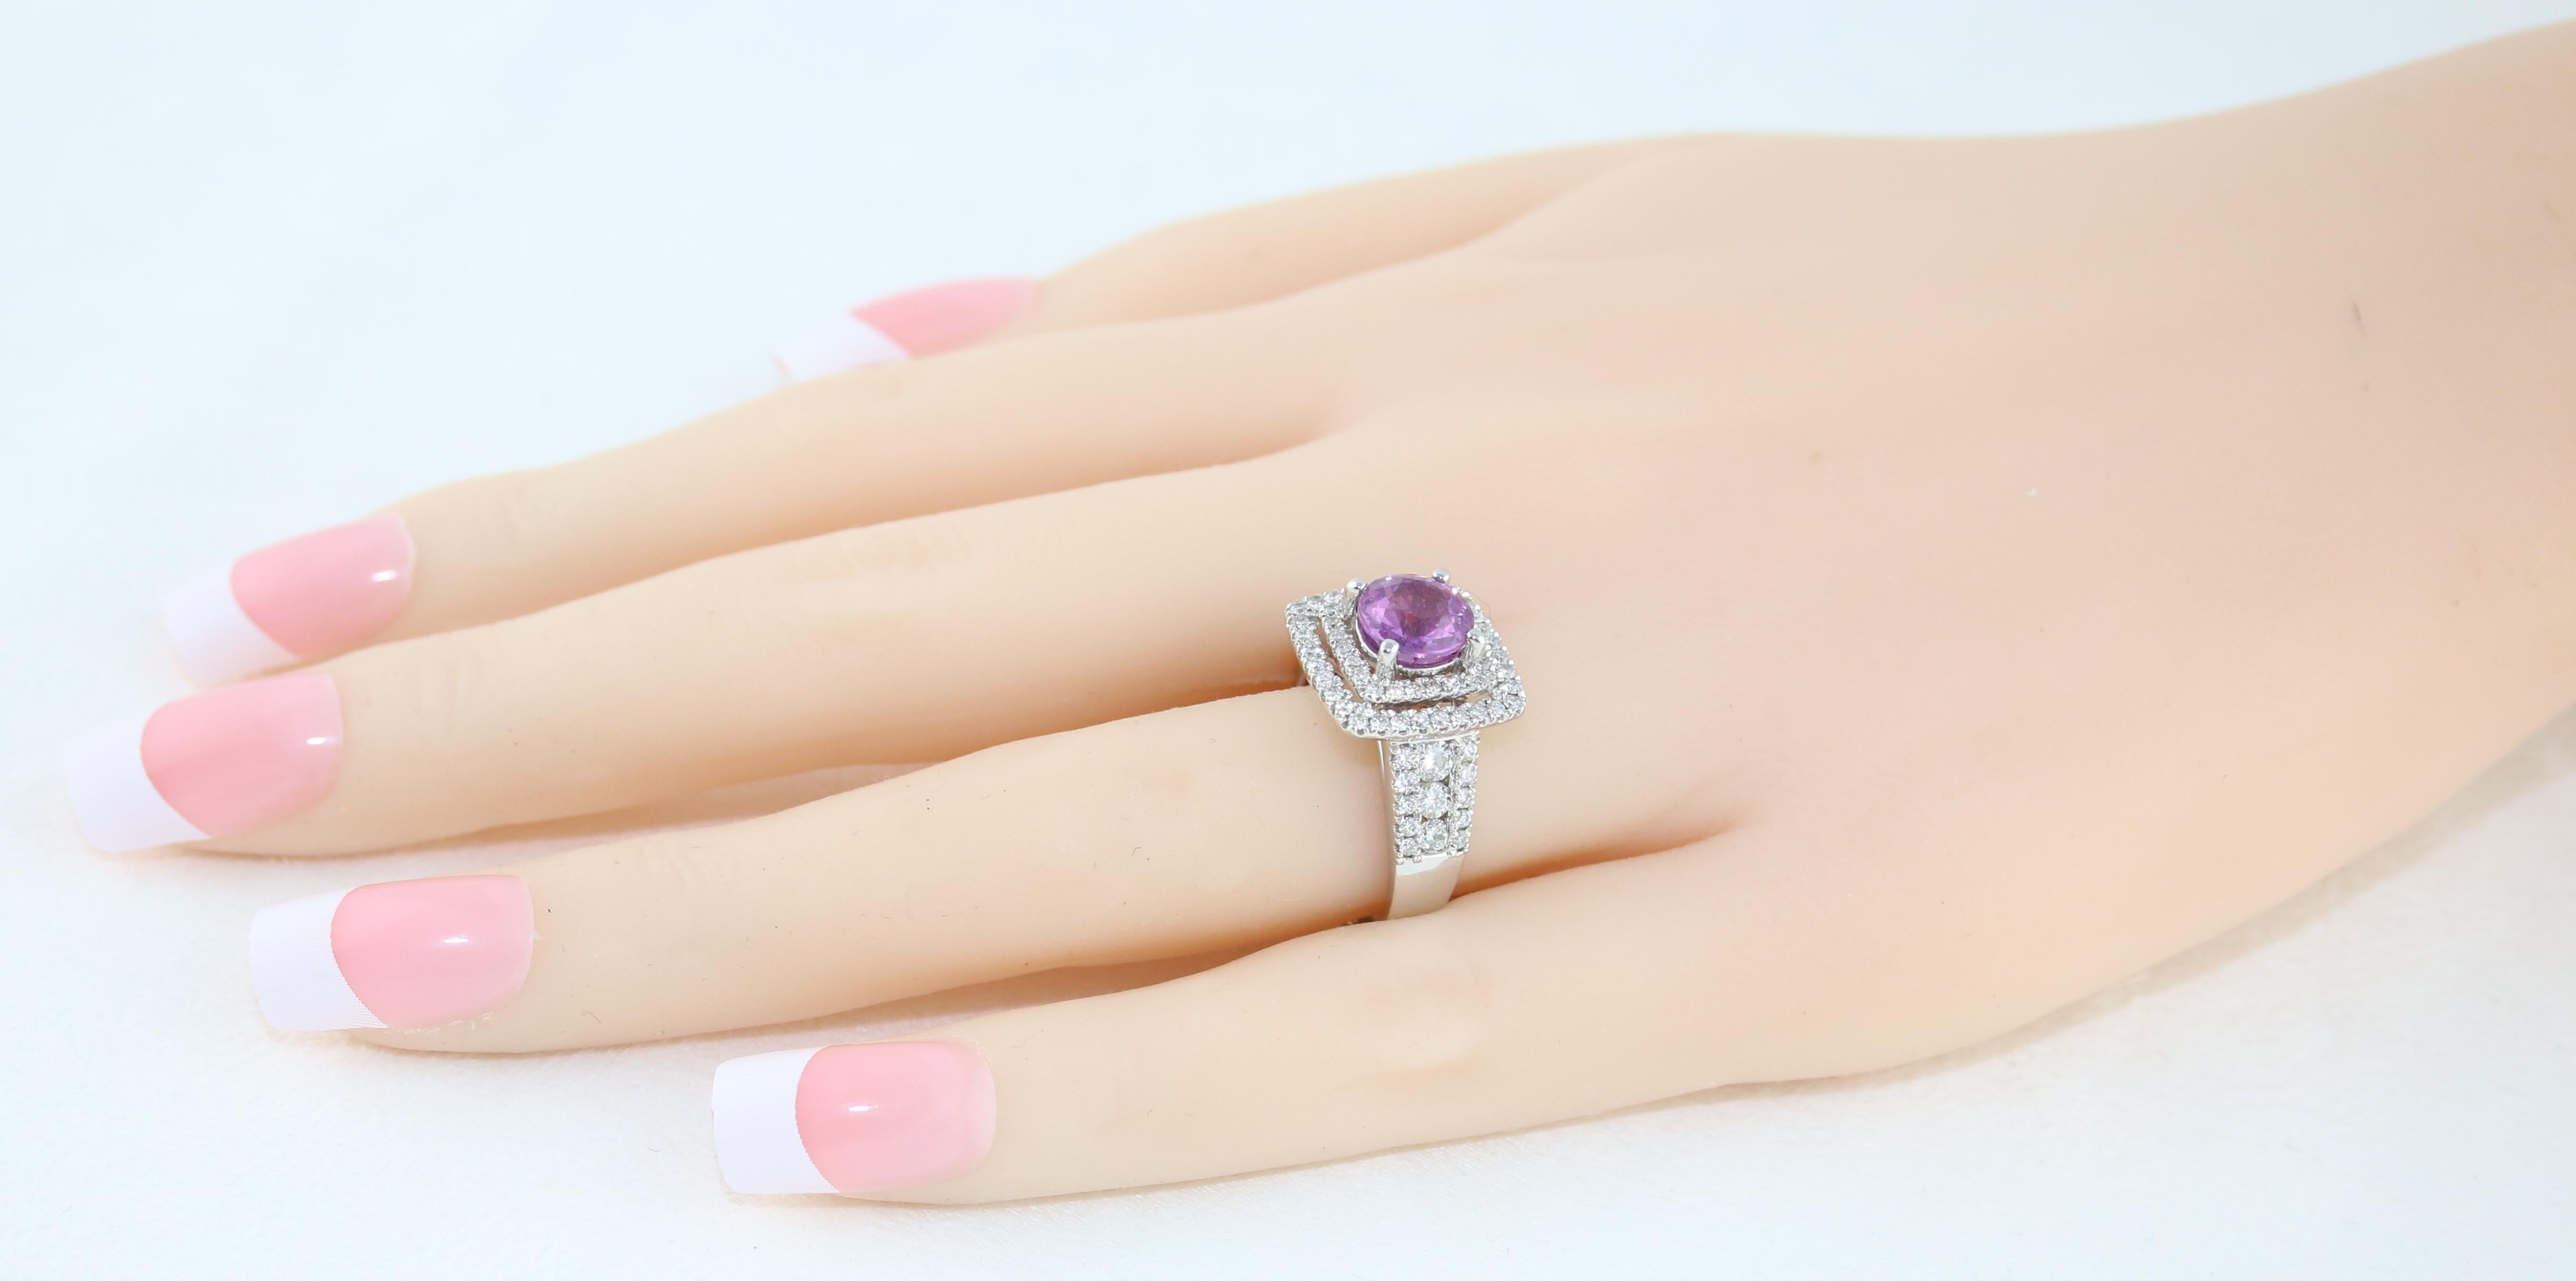 Certified No Heat 1.97 Carat Pinkish Violet Sapphire Diamond Gold Ring For Sale 2